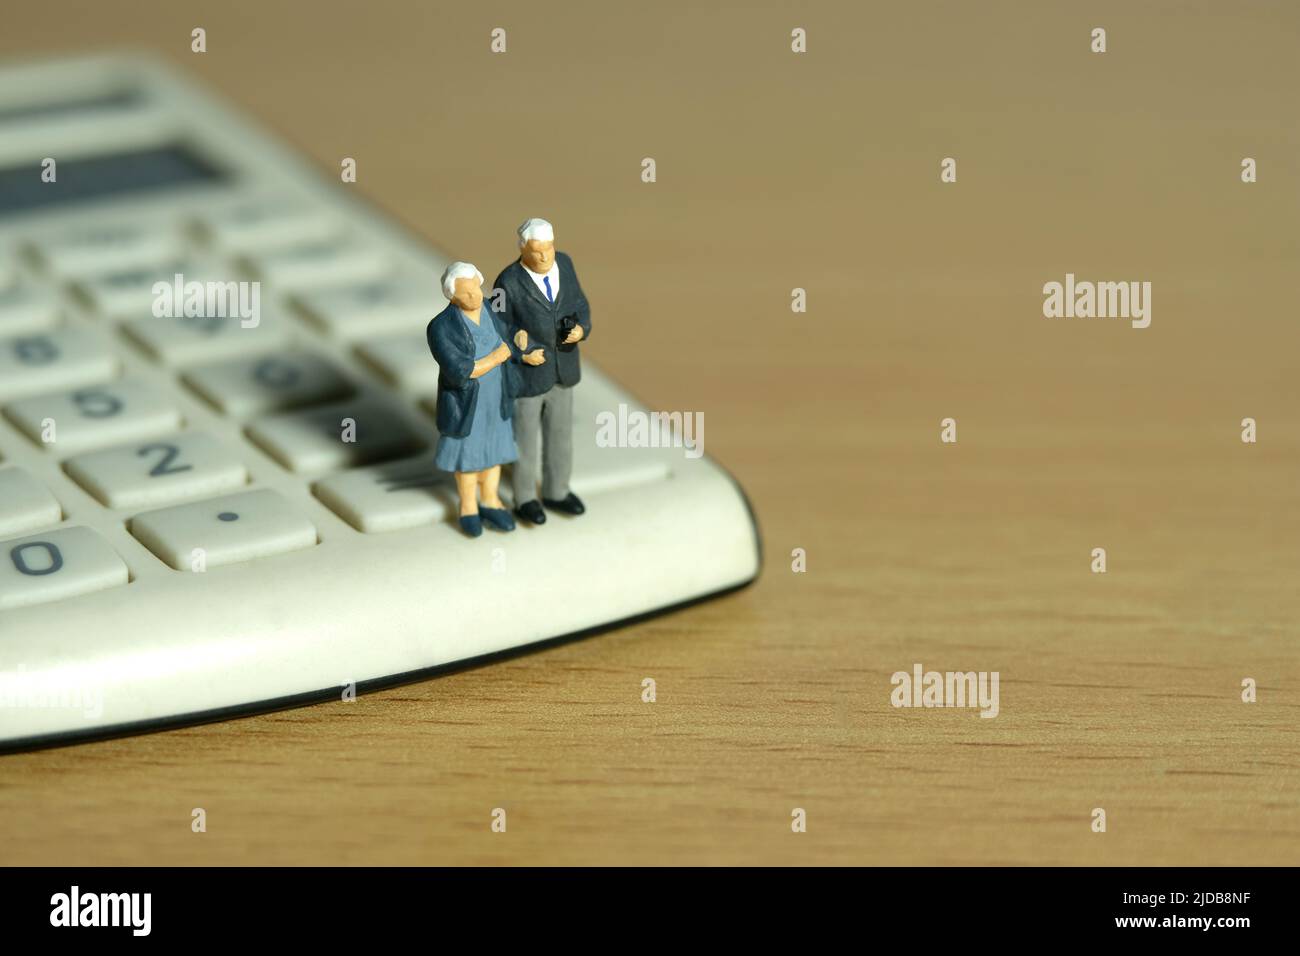 Miniature people toys conceptual photography. Elderly couple standing above calculator. Image photo Stock Photo